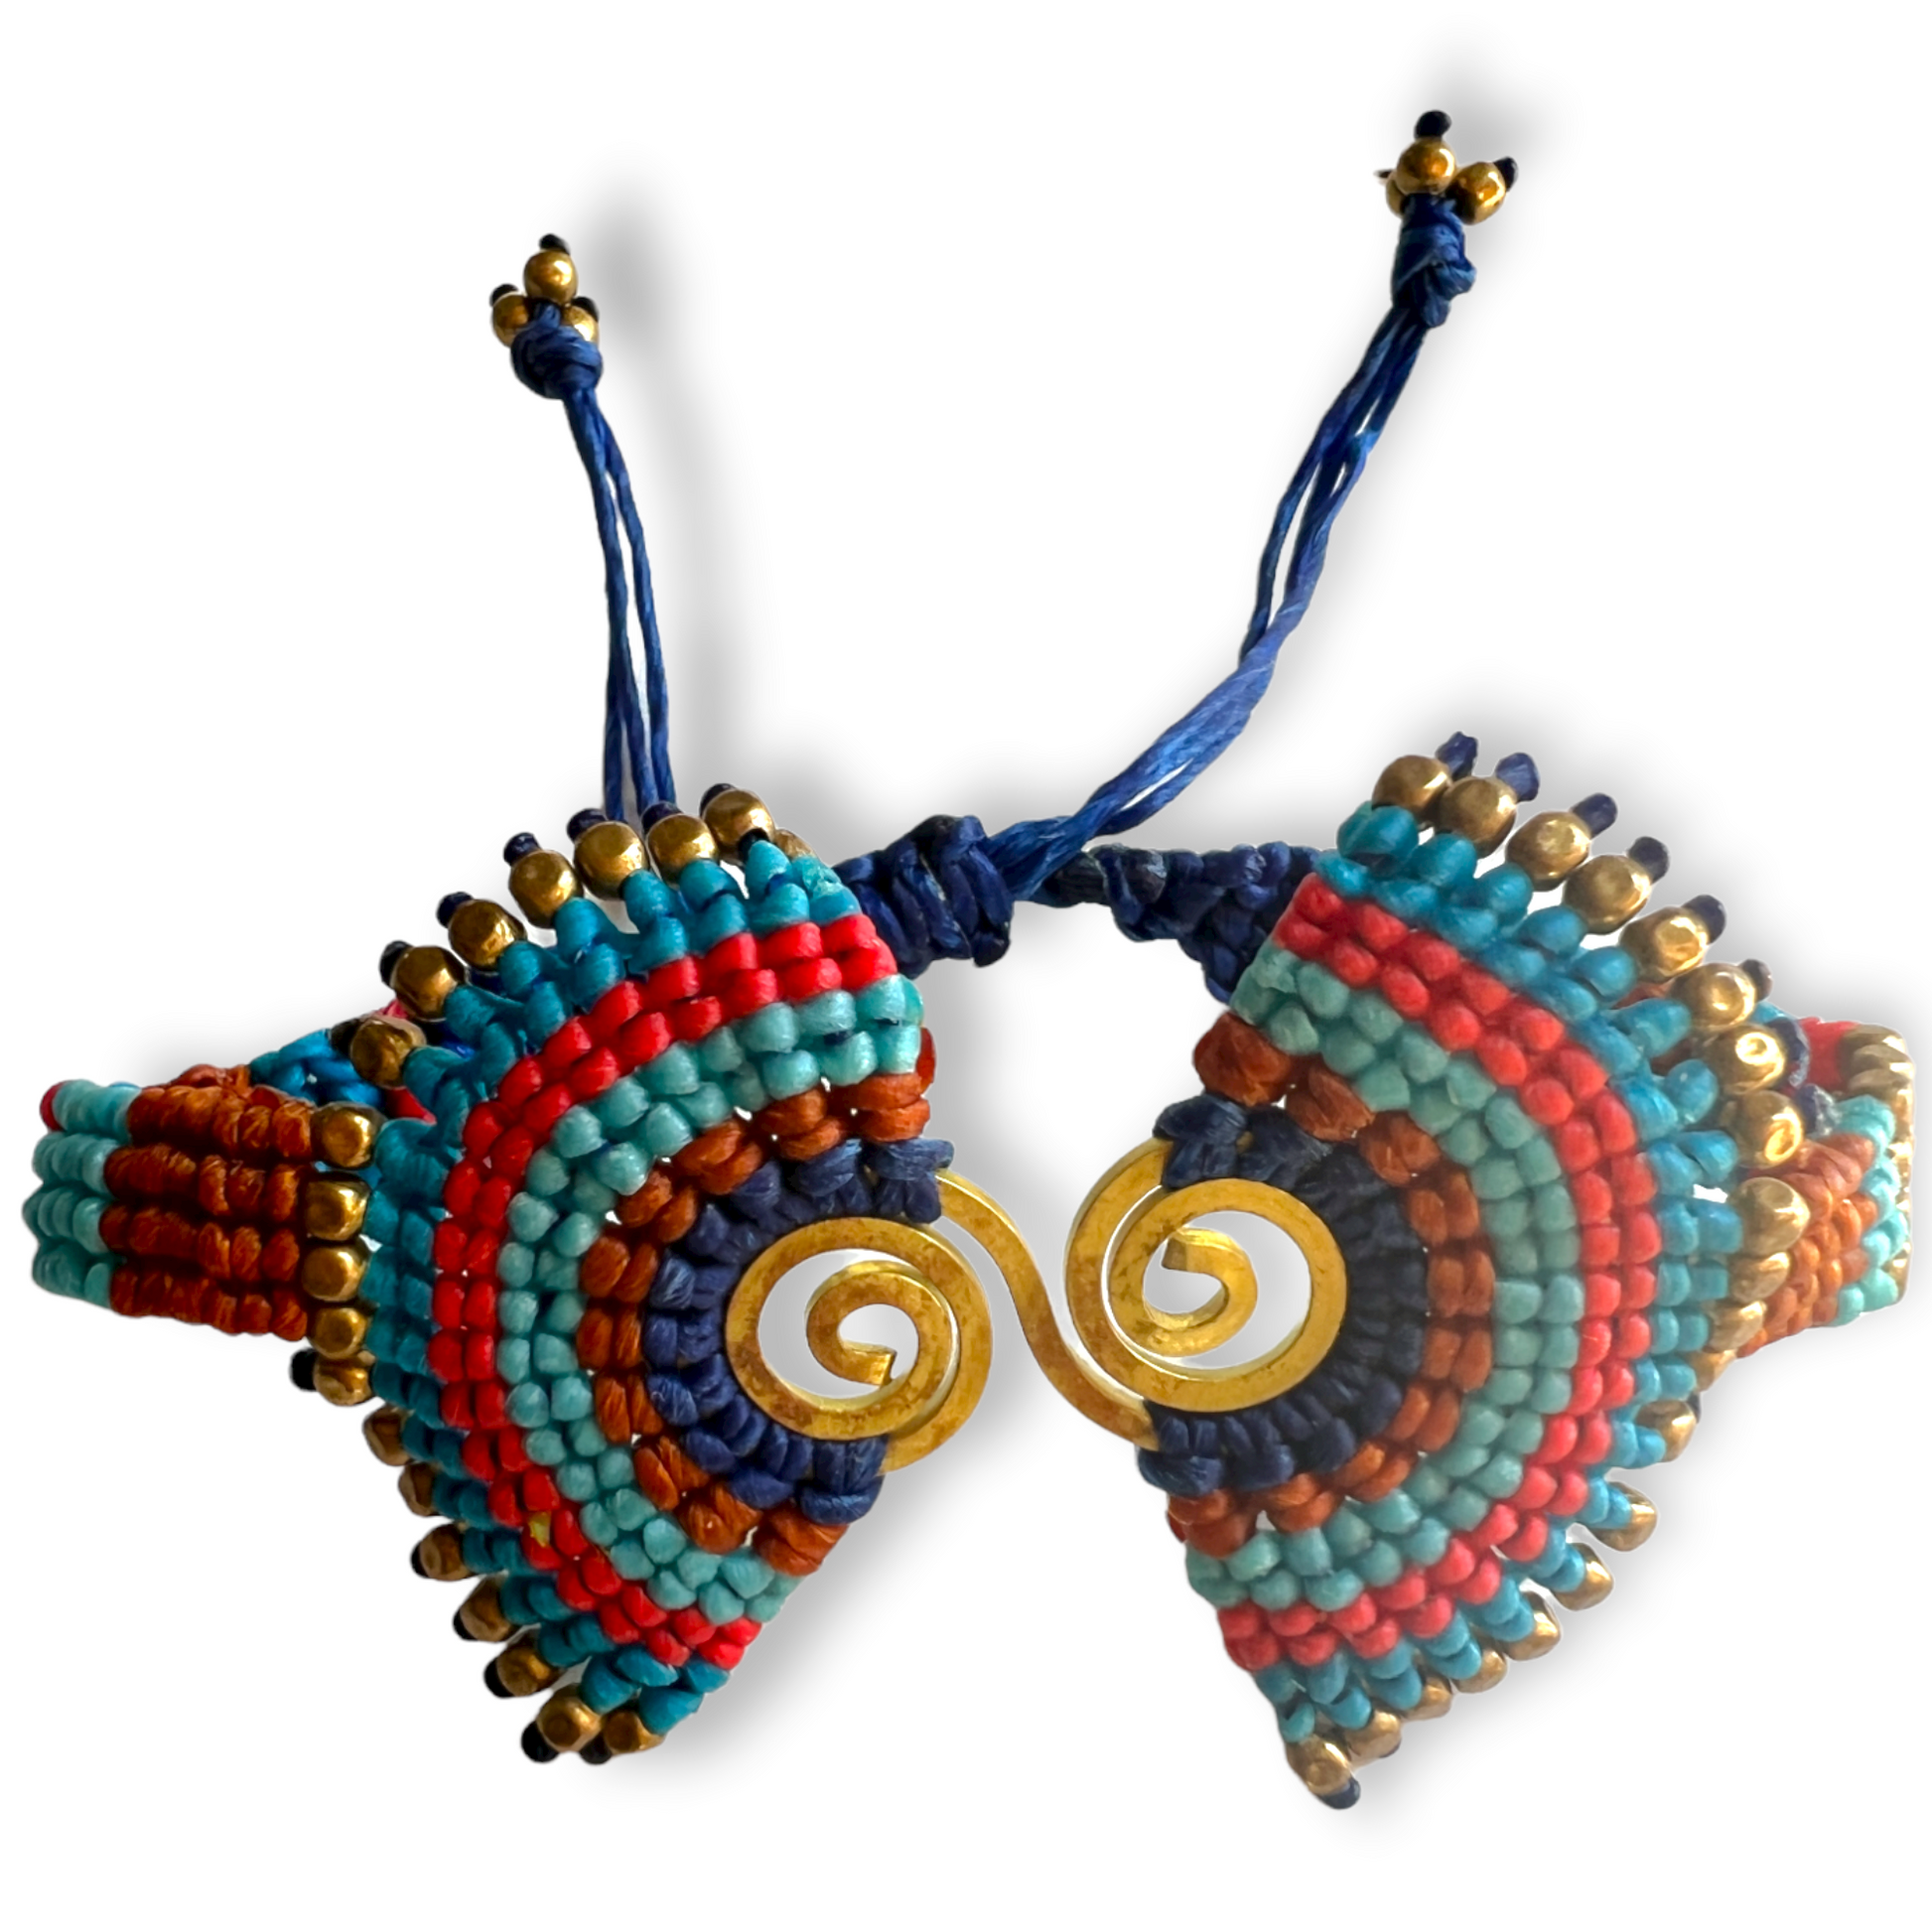 Woven bracelet with brass beads and colorful waxed cord in a tribal pattern - blue